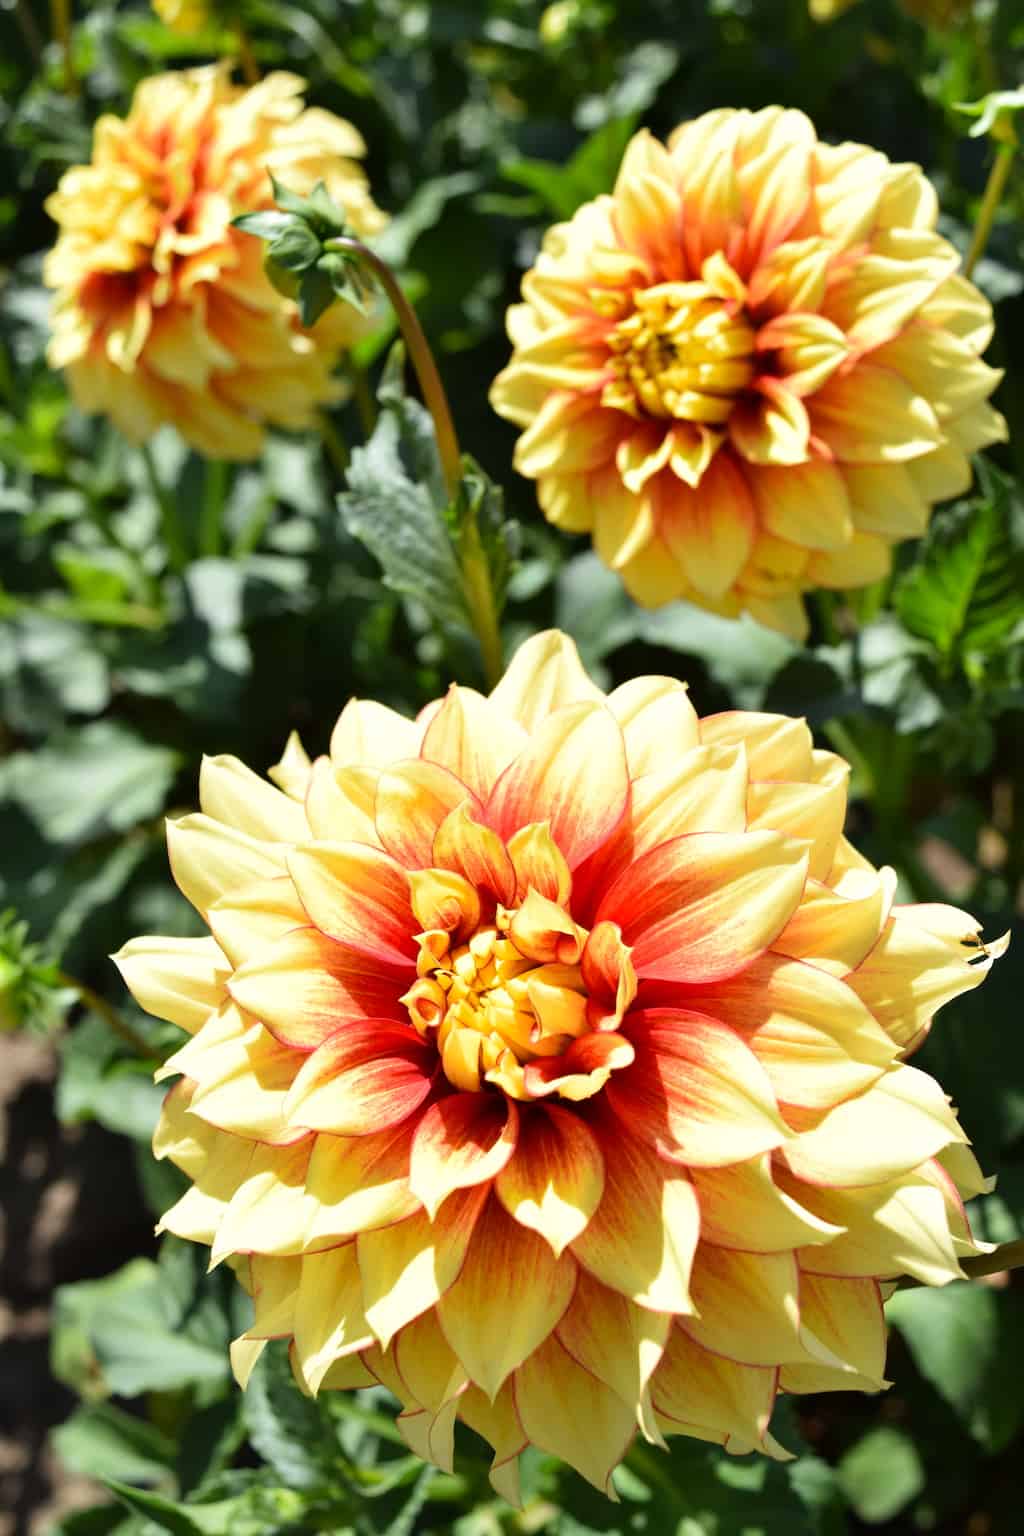 The country's largest dahlia farm is near Portland, Oregon, and open to the public for free!